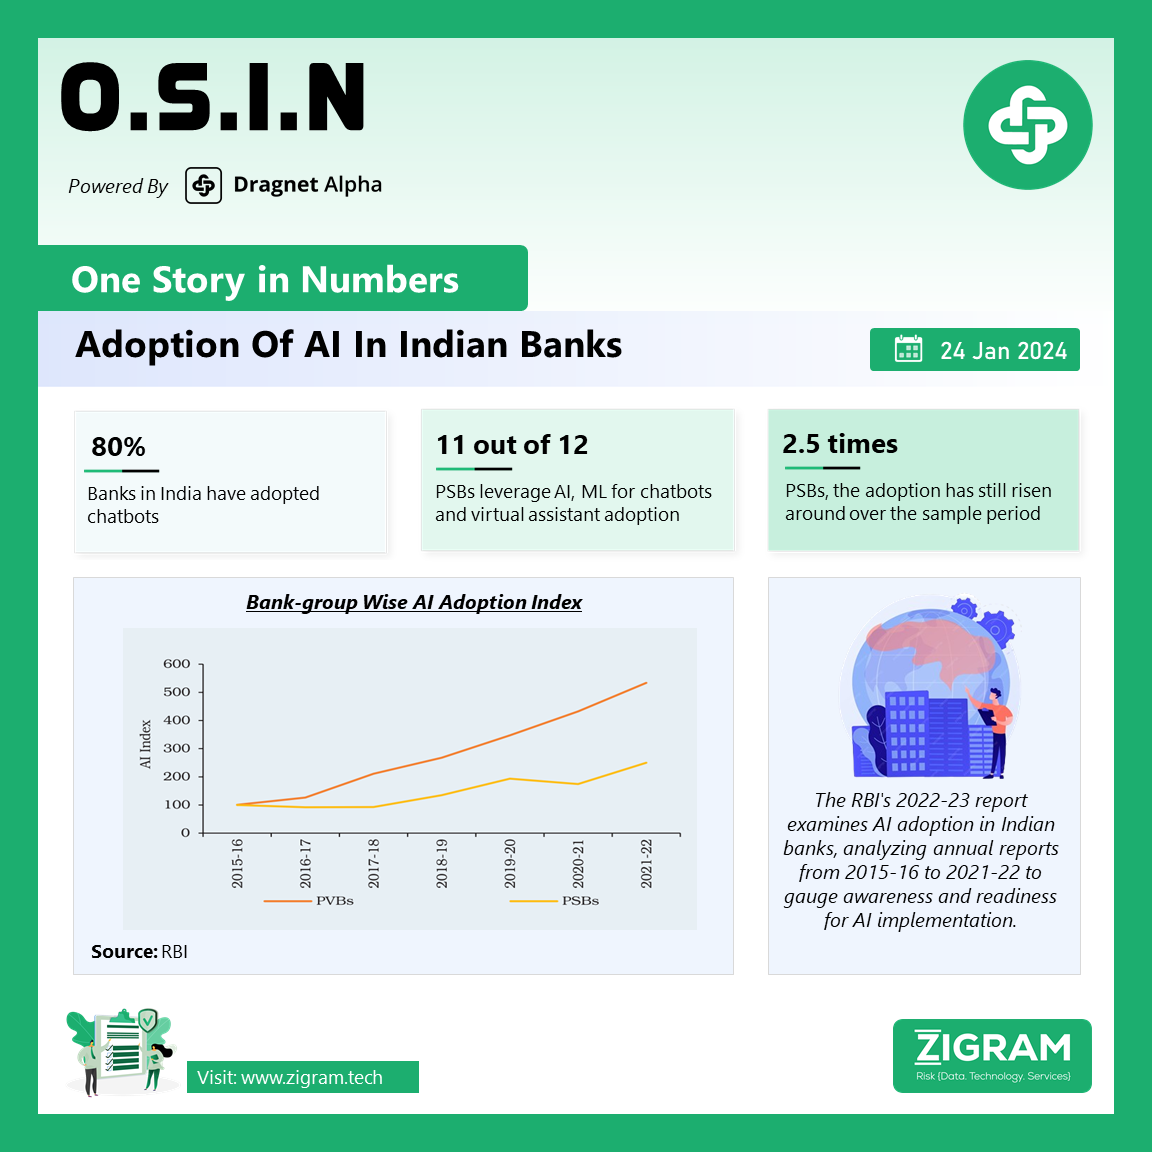 Adoption Of AI In Indian Banks